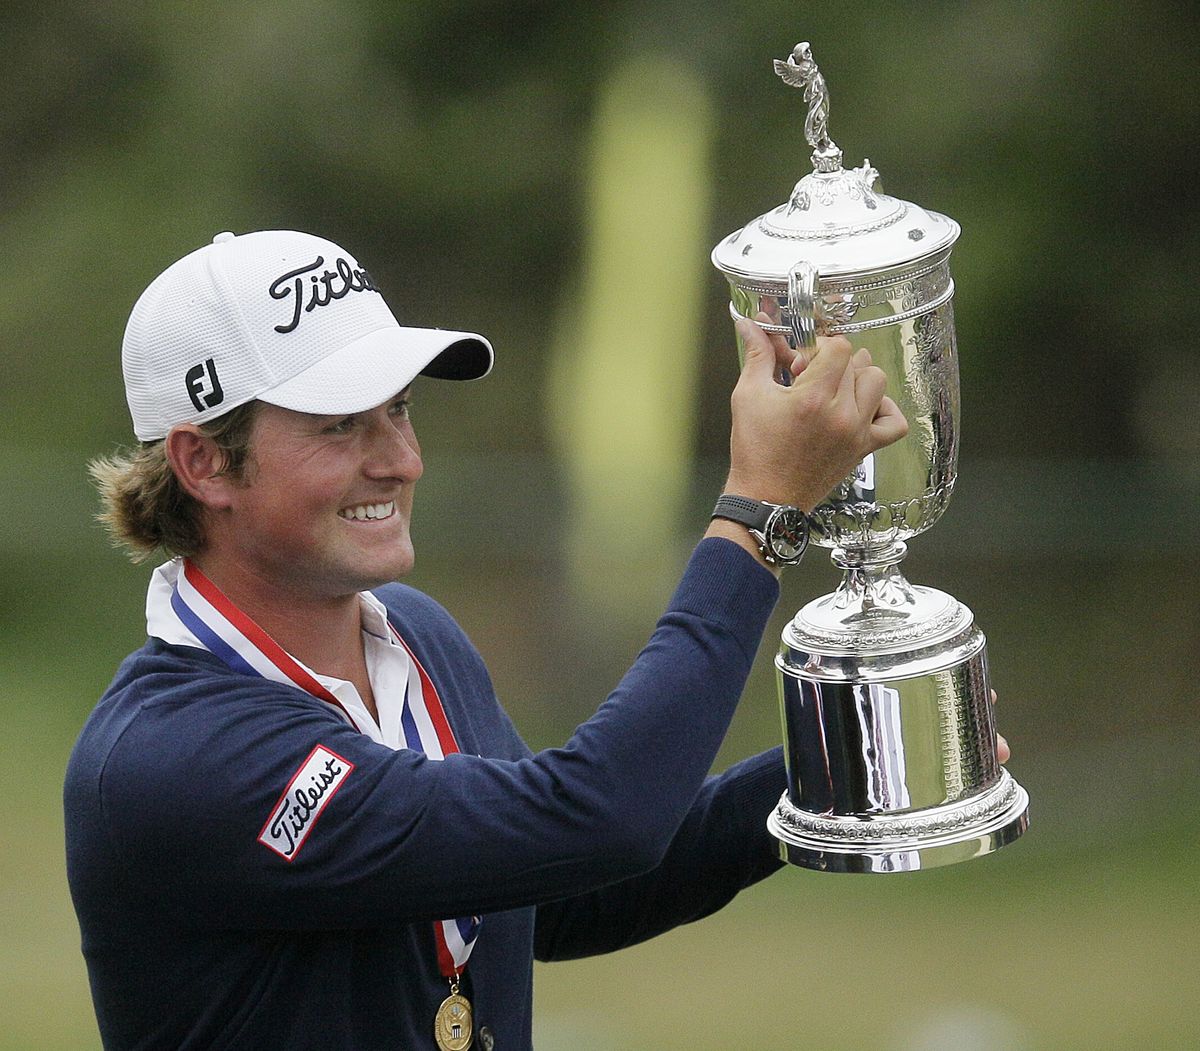 Webb Simpson shot a 2-under 68 Sunday to win by a stroke. (Associated Press)